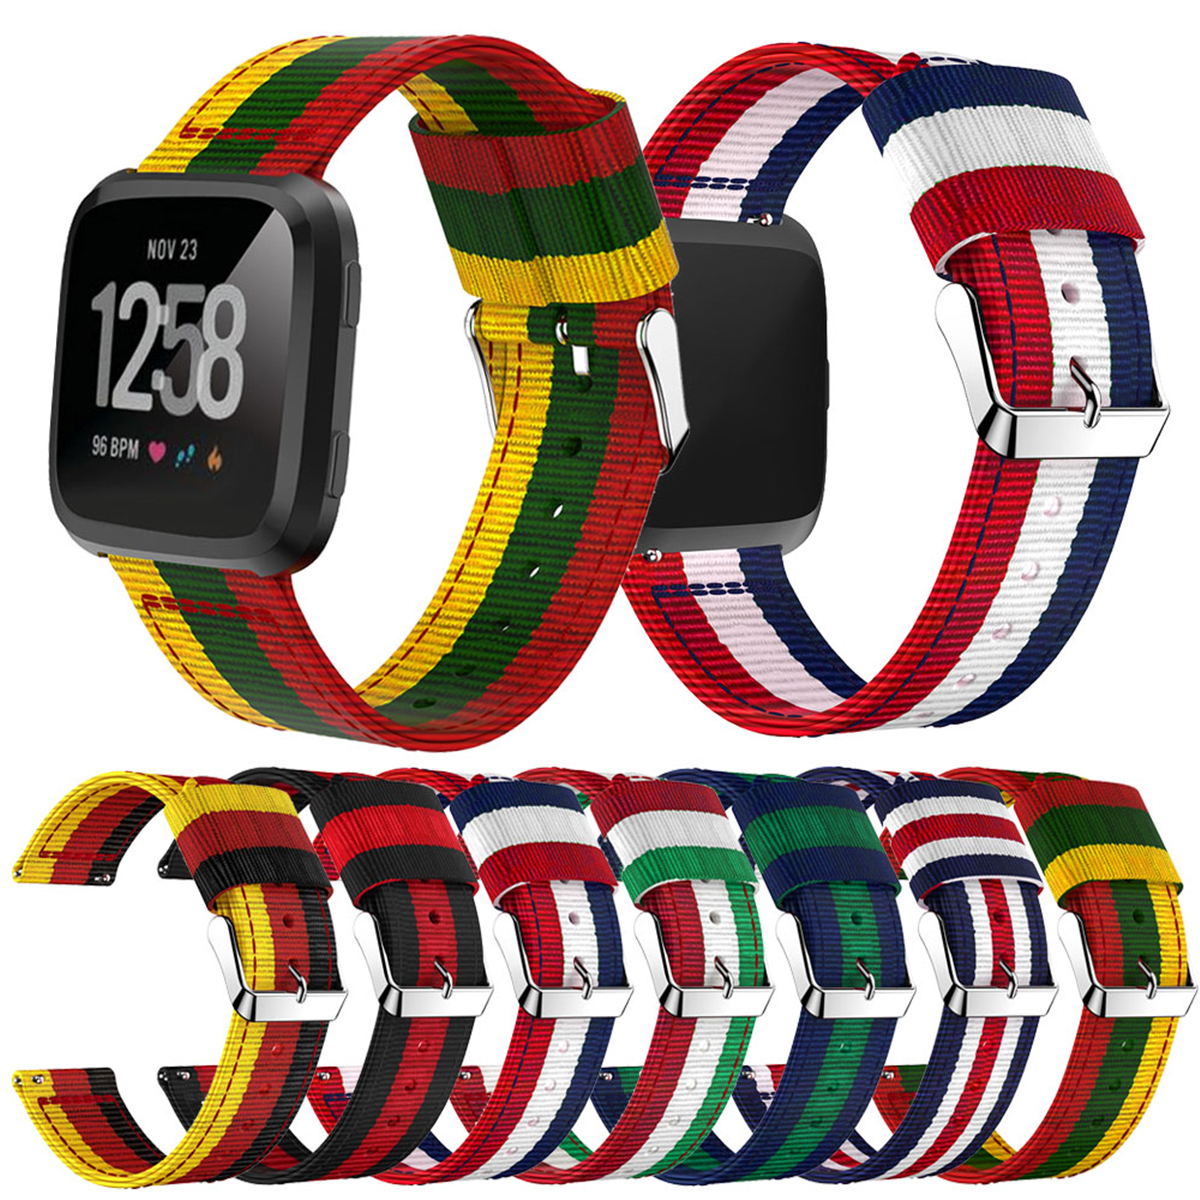 

Bakeey Replacement Colorful Woven Nylon Fabric Sport Wristband Strap for Fitbit Versa